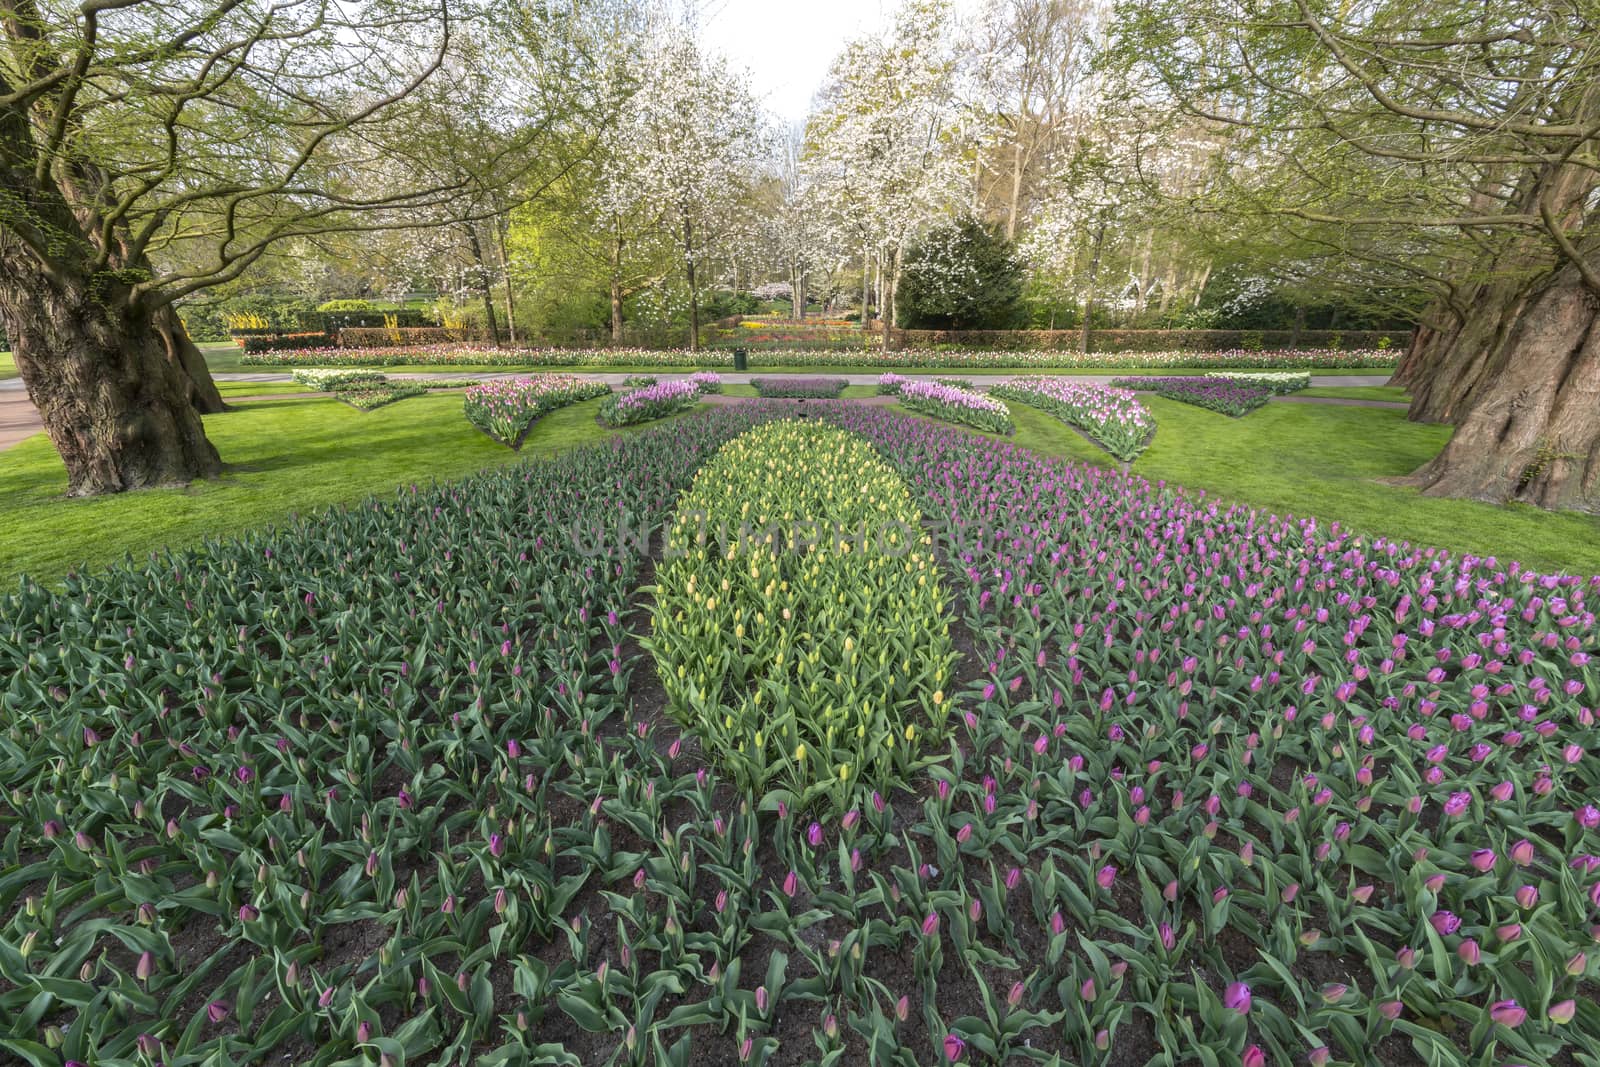 Purple tulips blossom blooming under a very well maintained garden in spring time